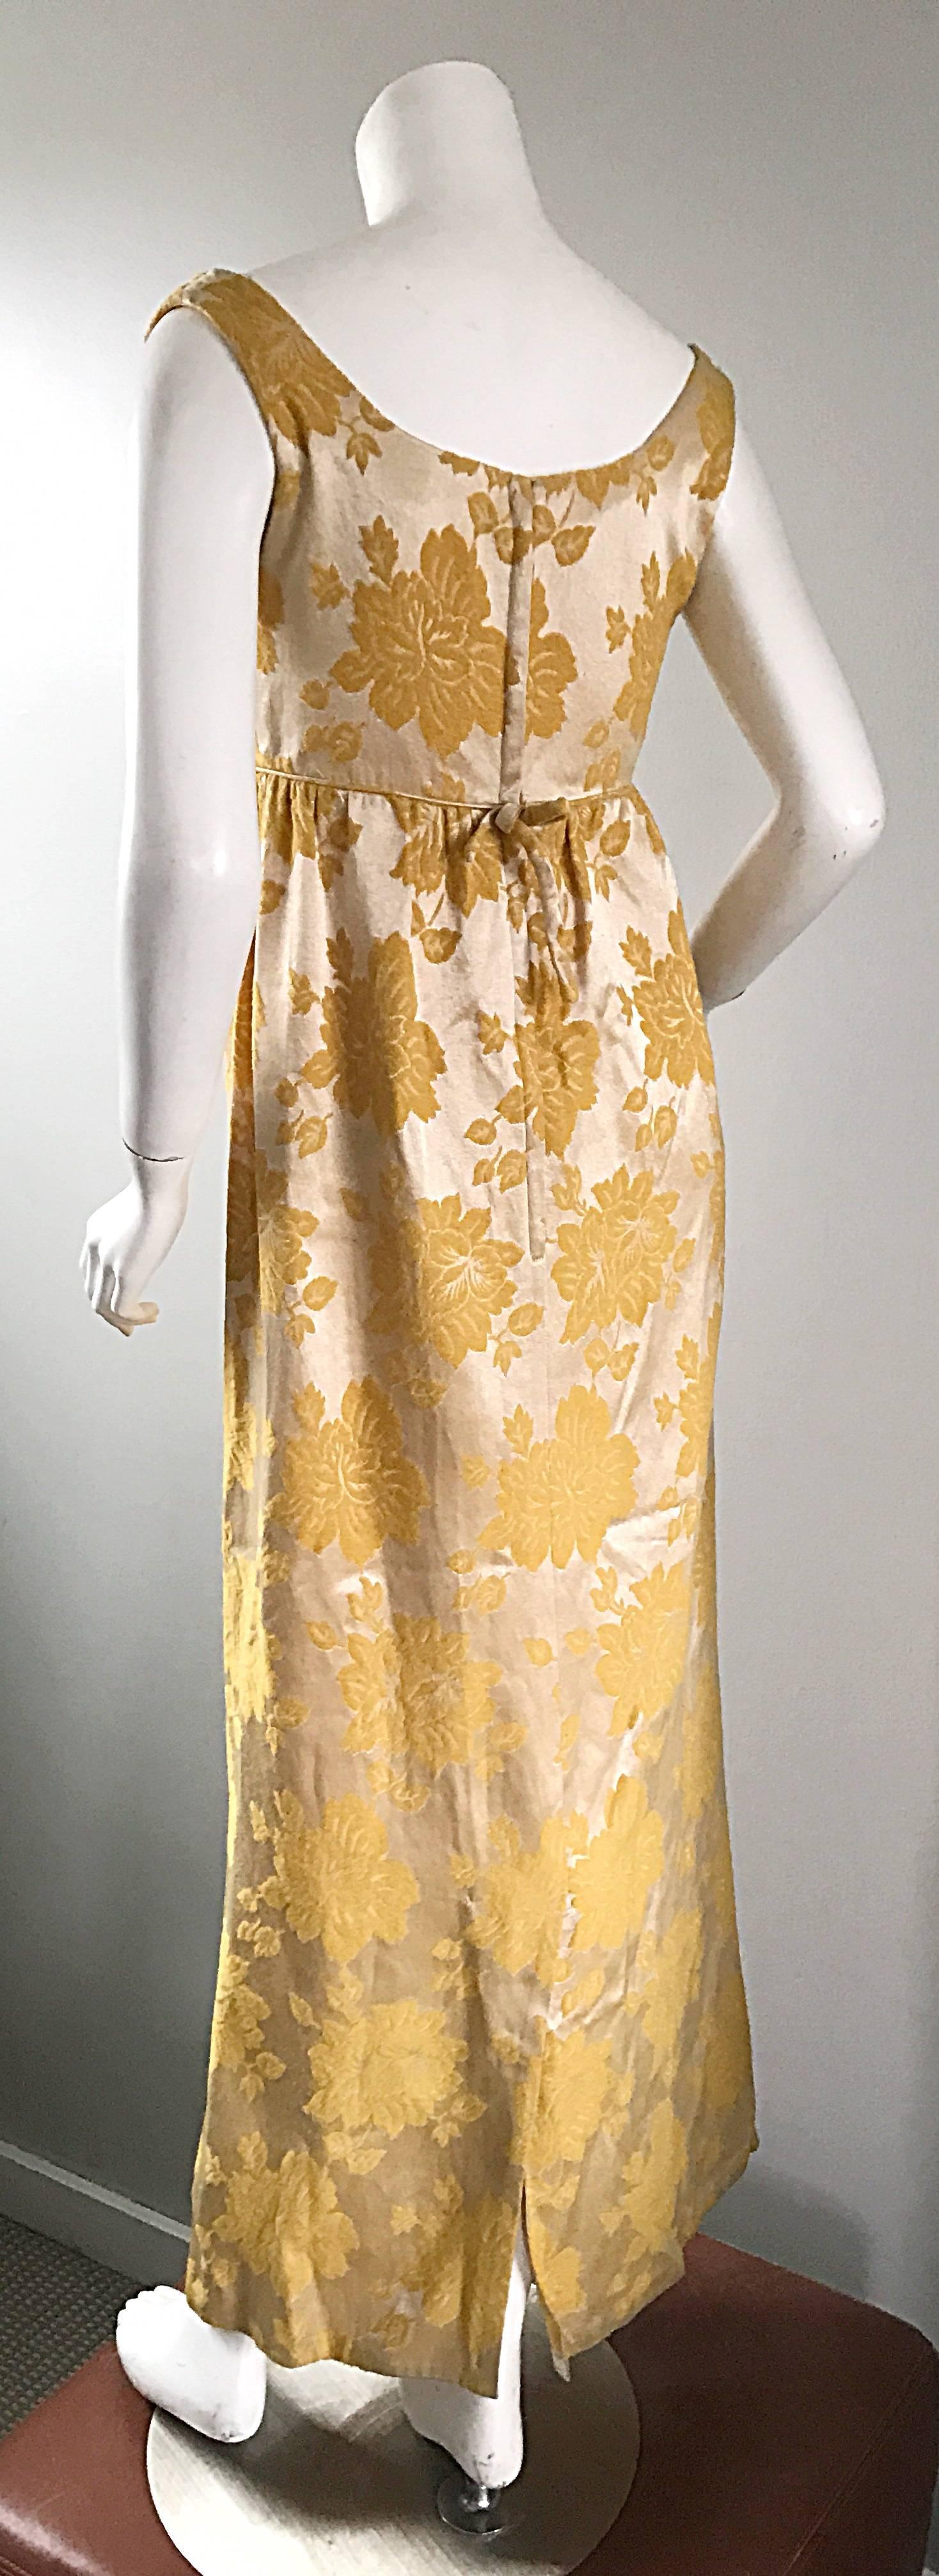 Brown Beautiful 1960s 60s Marigold Yellow Gold Metallic Floral Evening Gown Maxi Dress For Sale